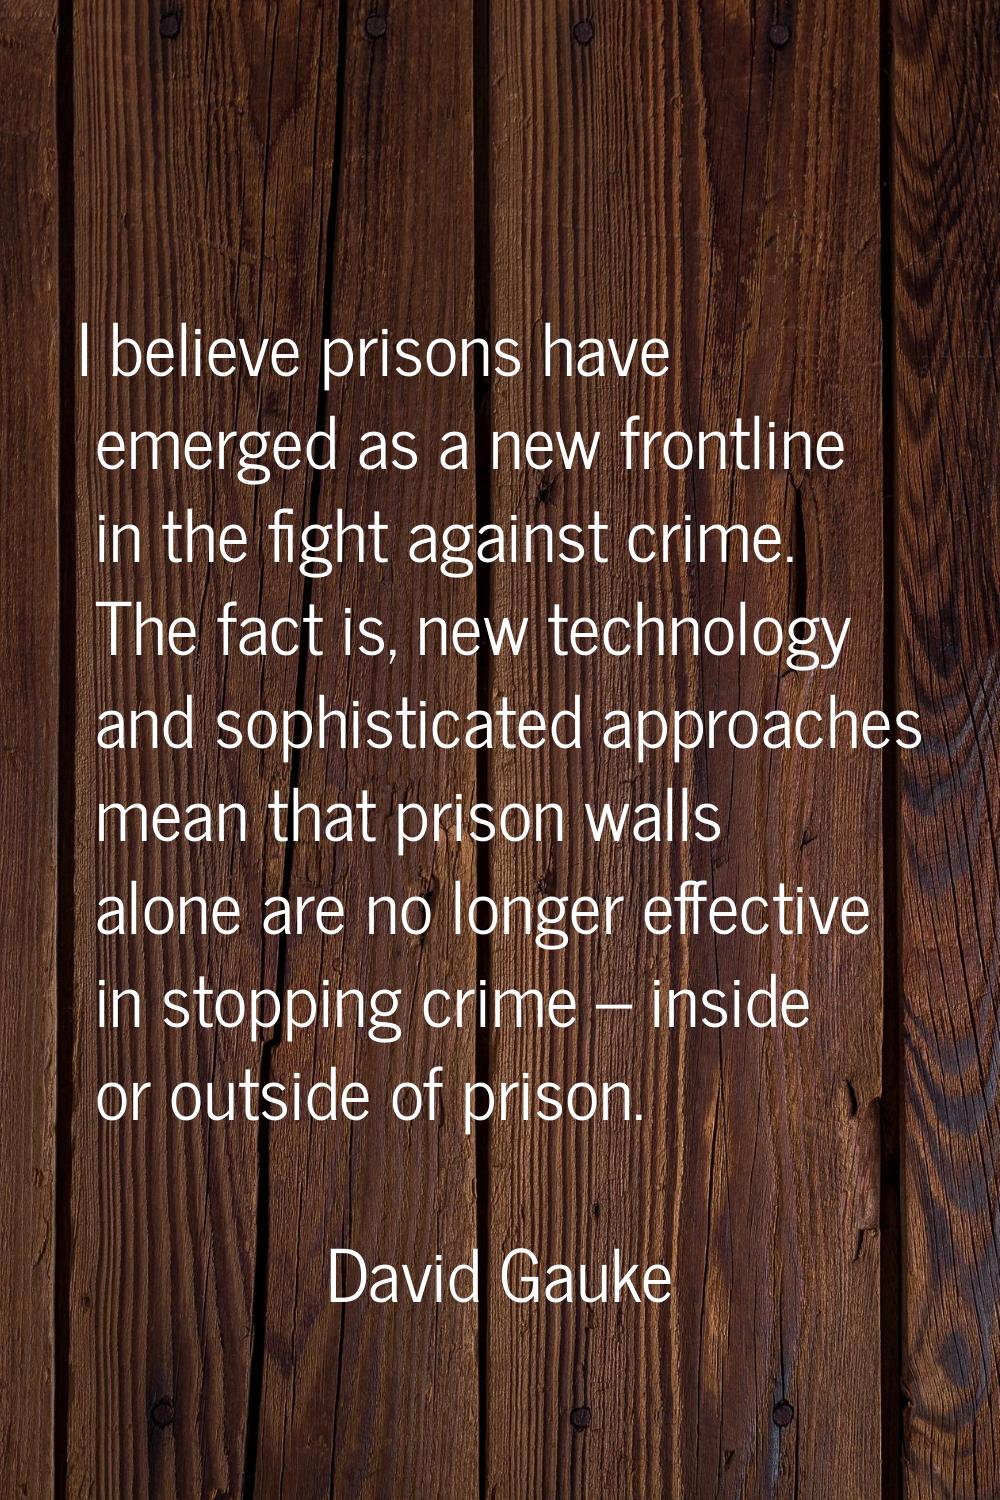 I believe prisons have emerged as a new frontline in the fight against crime. The fact is, new tech